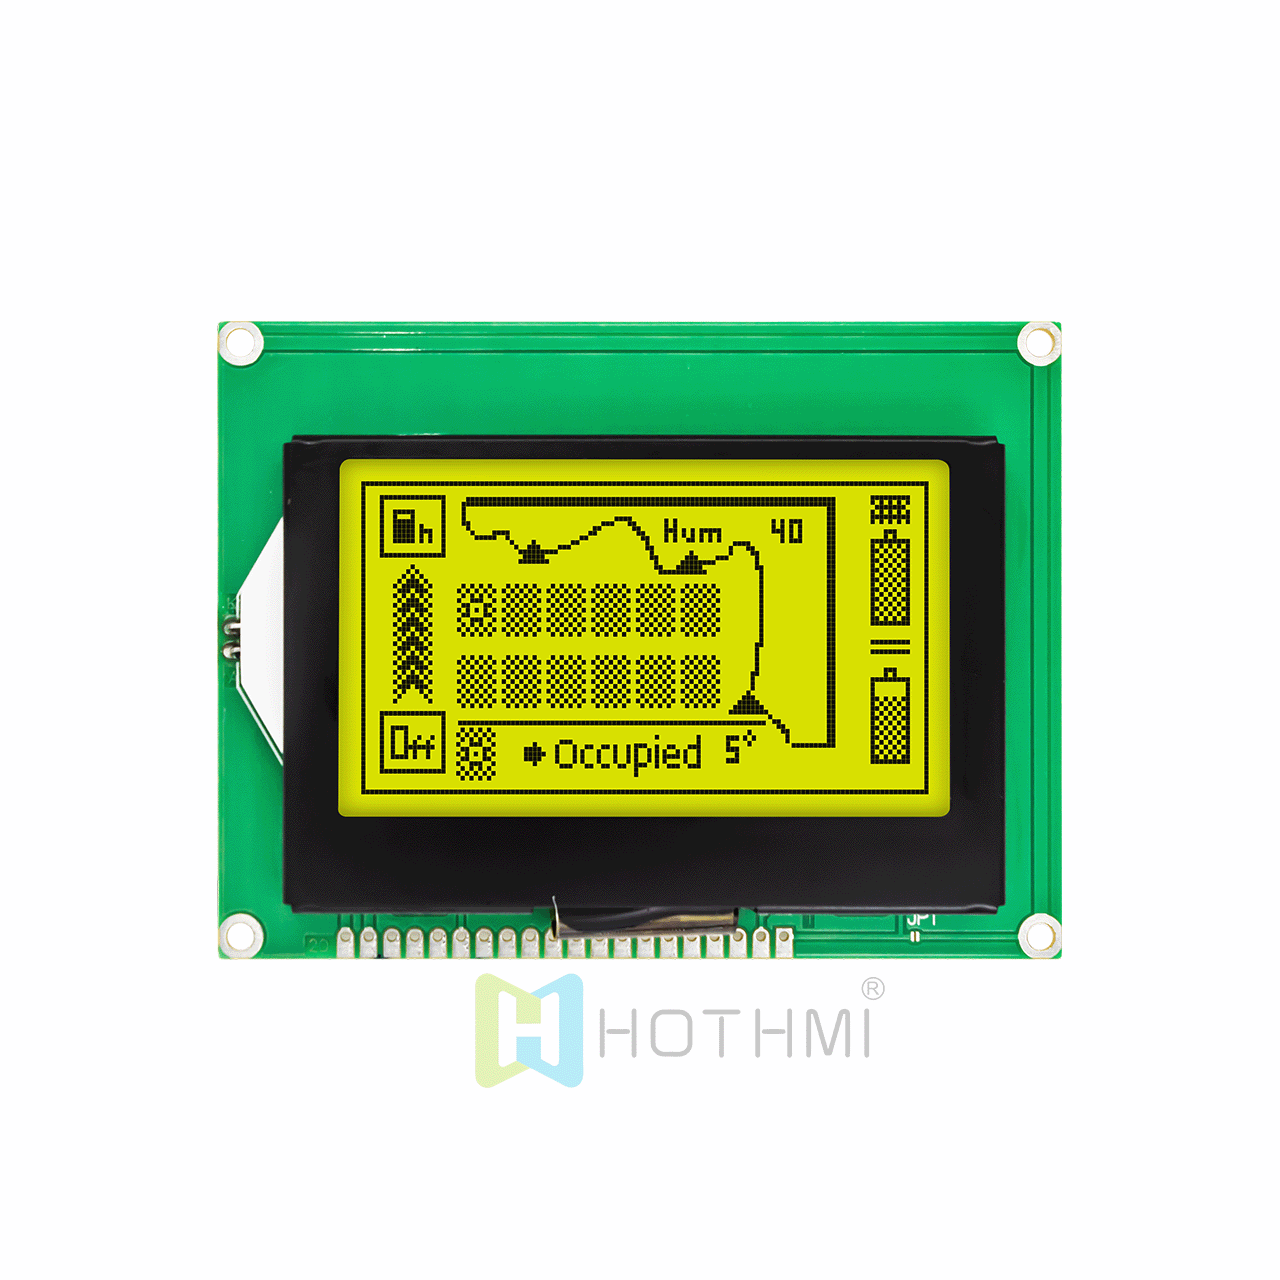 3-inch graphic LCD module | 128x64 graphic dot matrix module | 128 X 64 graphic LCD display | STN positive yellow-green backlight | SPI interface